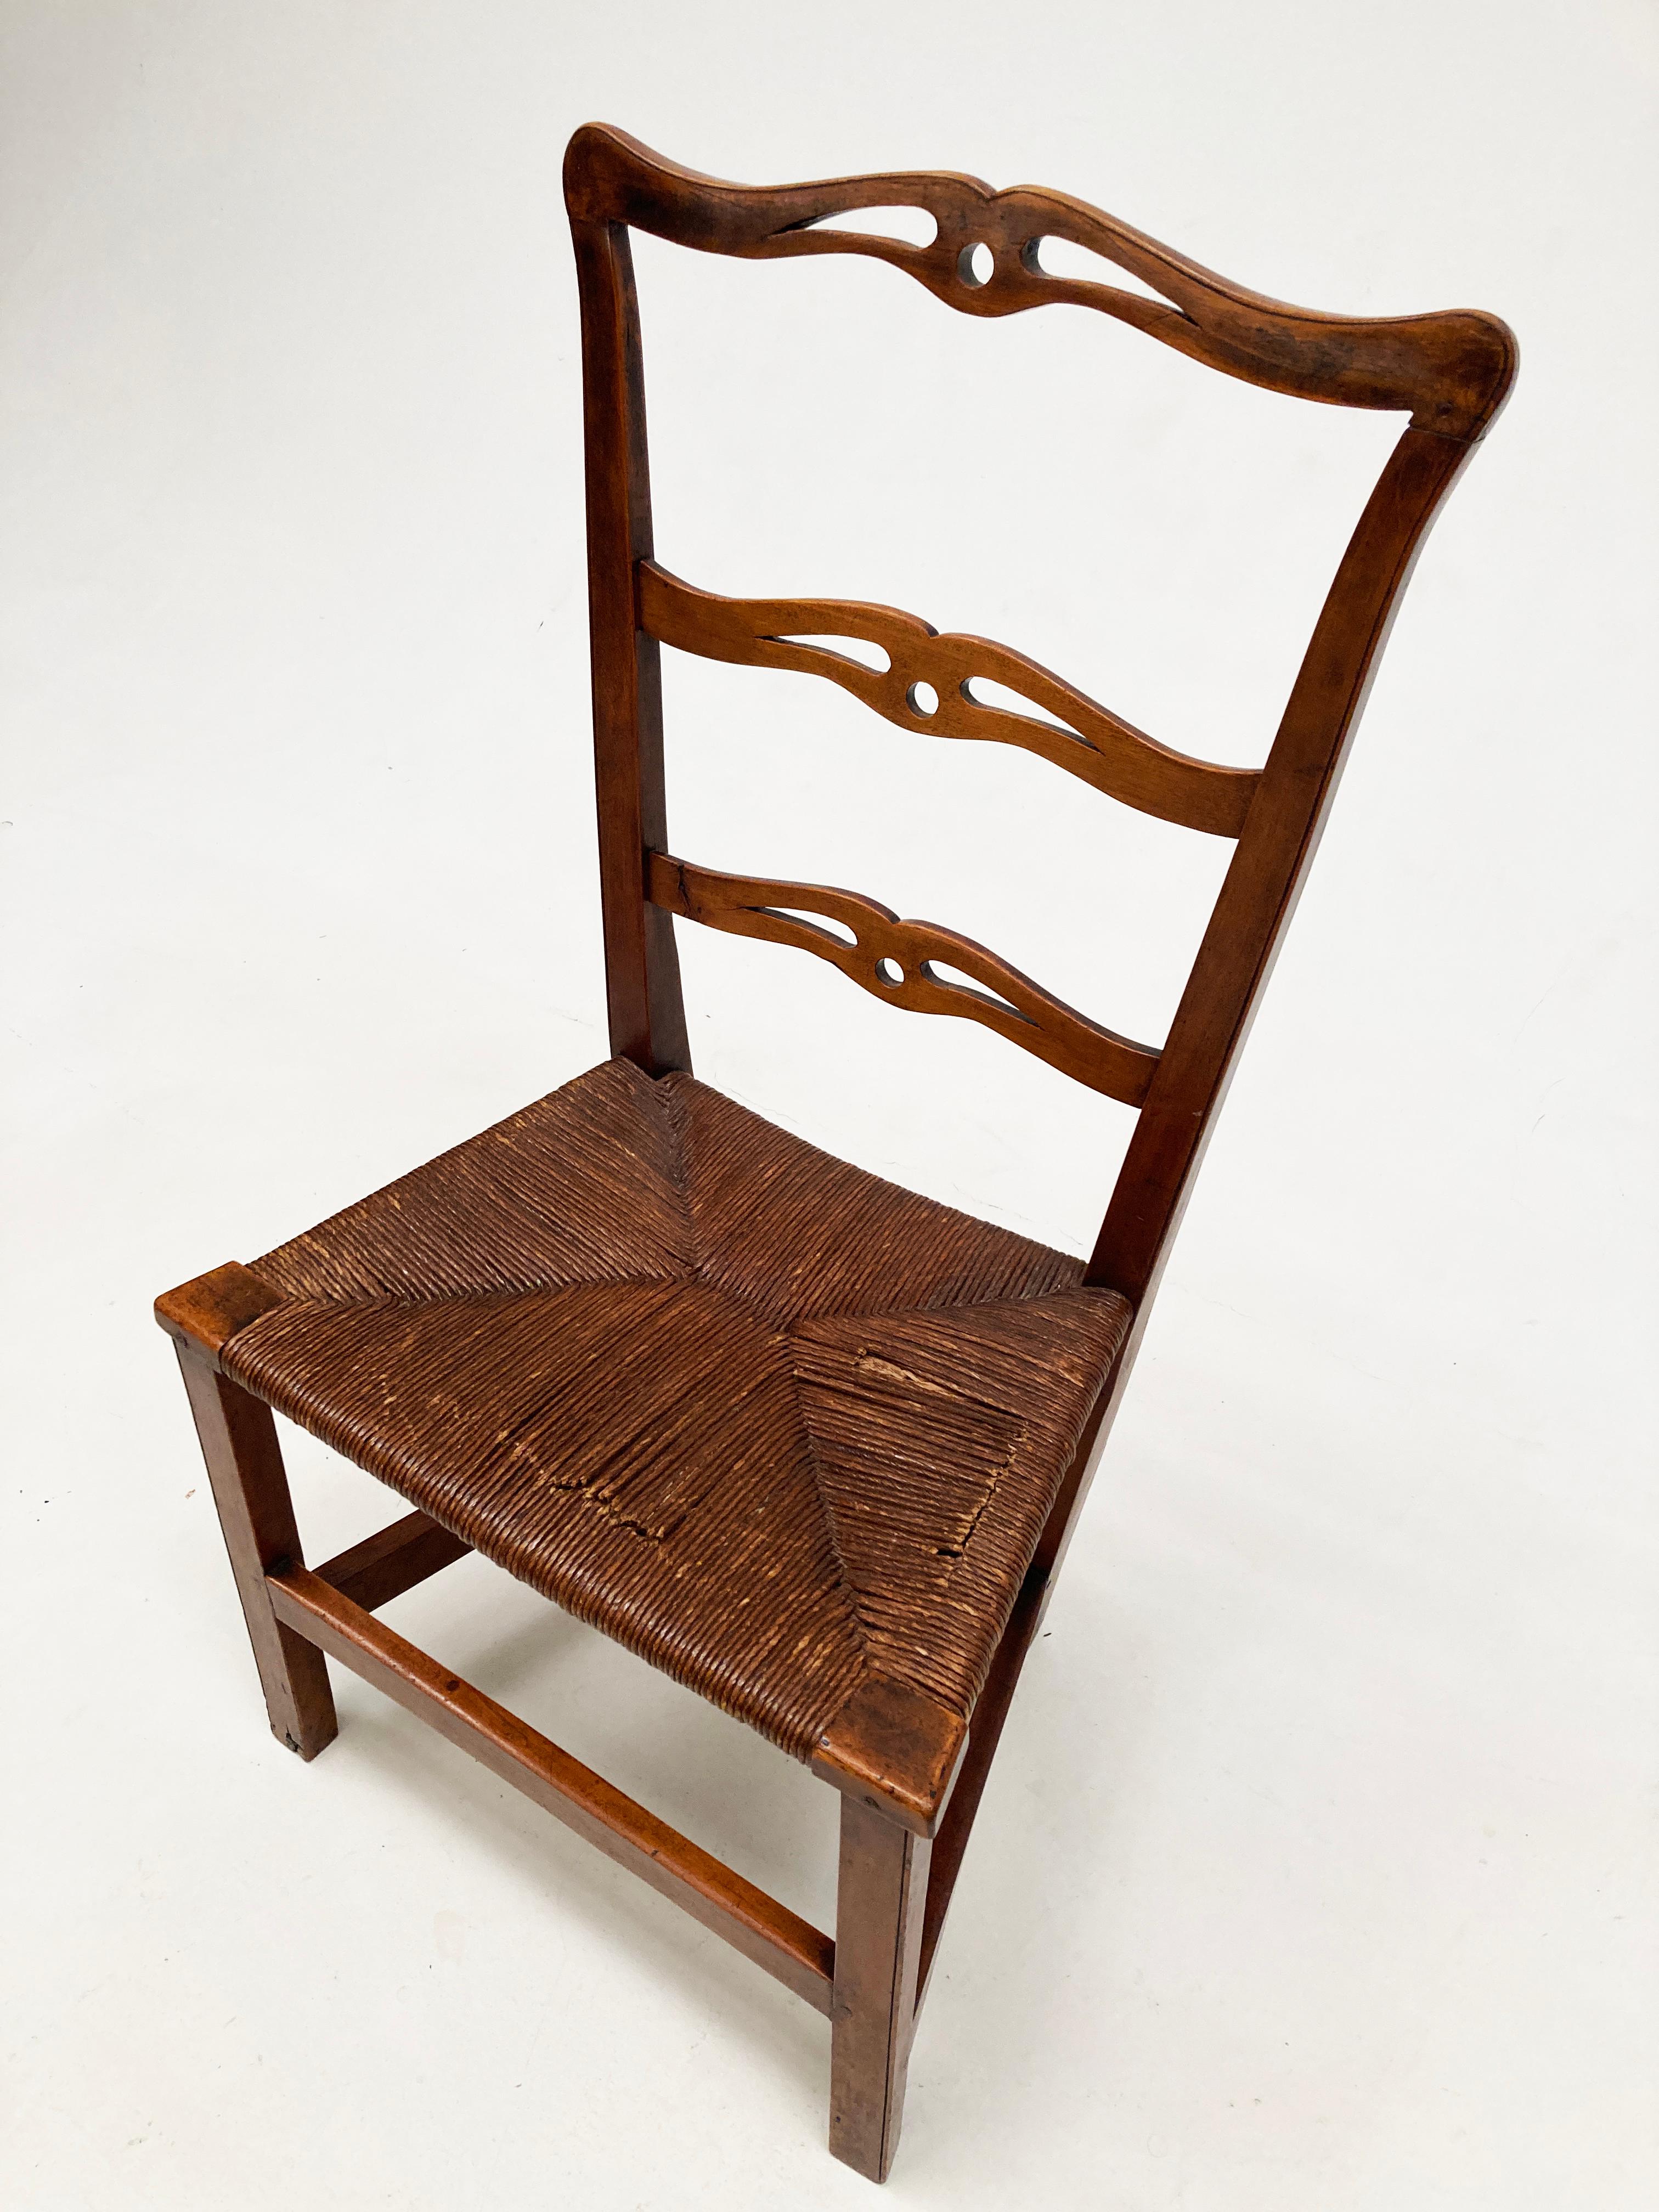 1700s chair